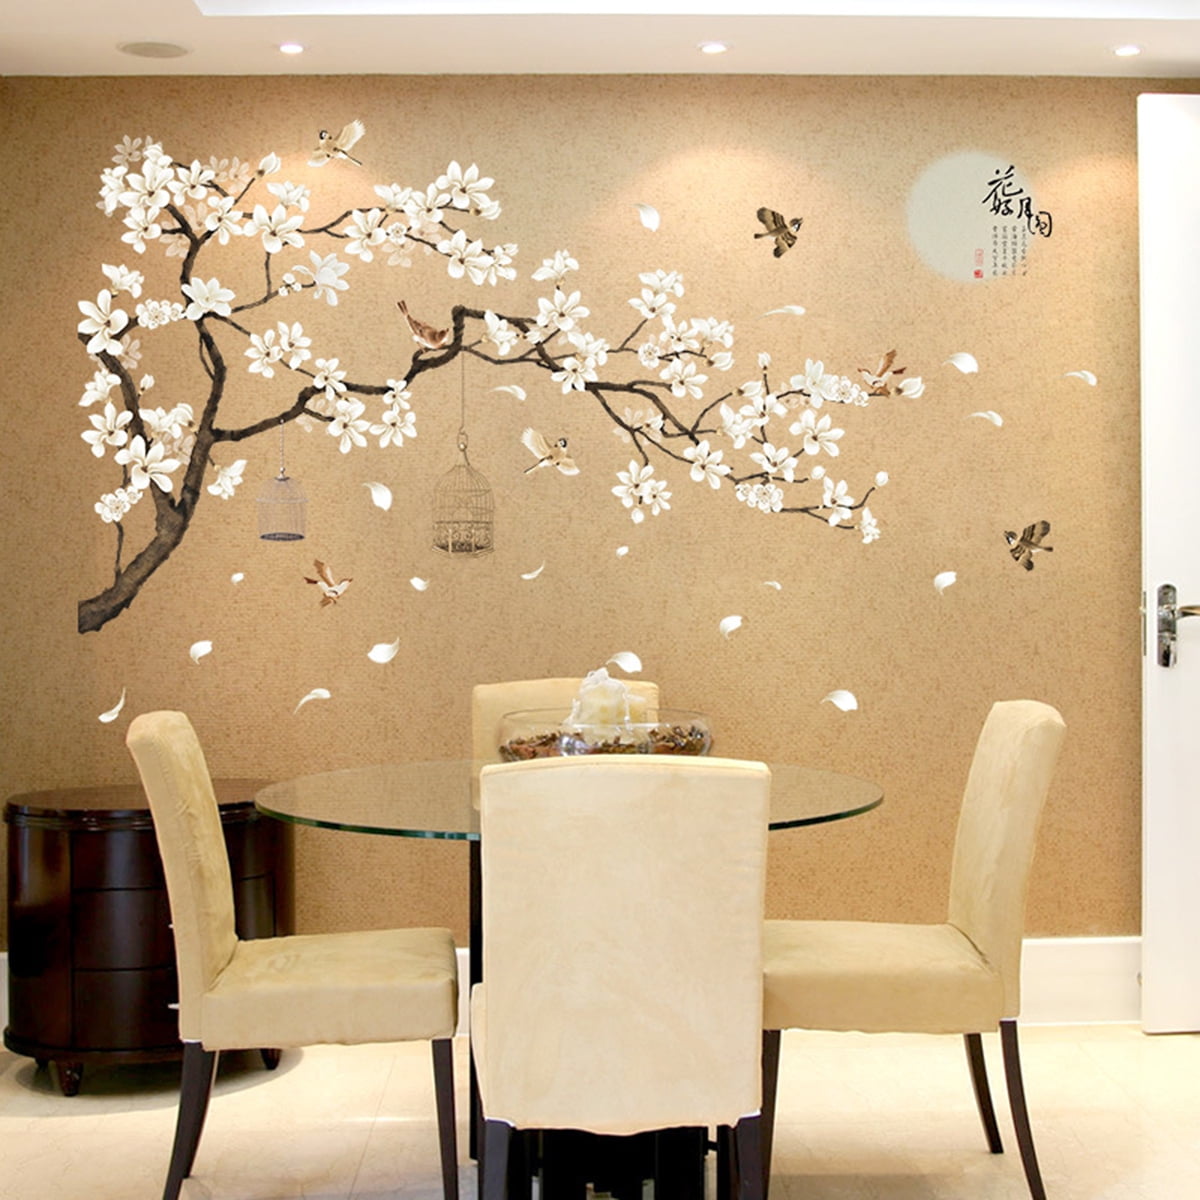 Giant wallpaper mural for bedroom living room walls Path in the park green trees 